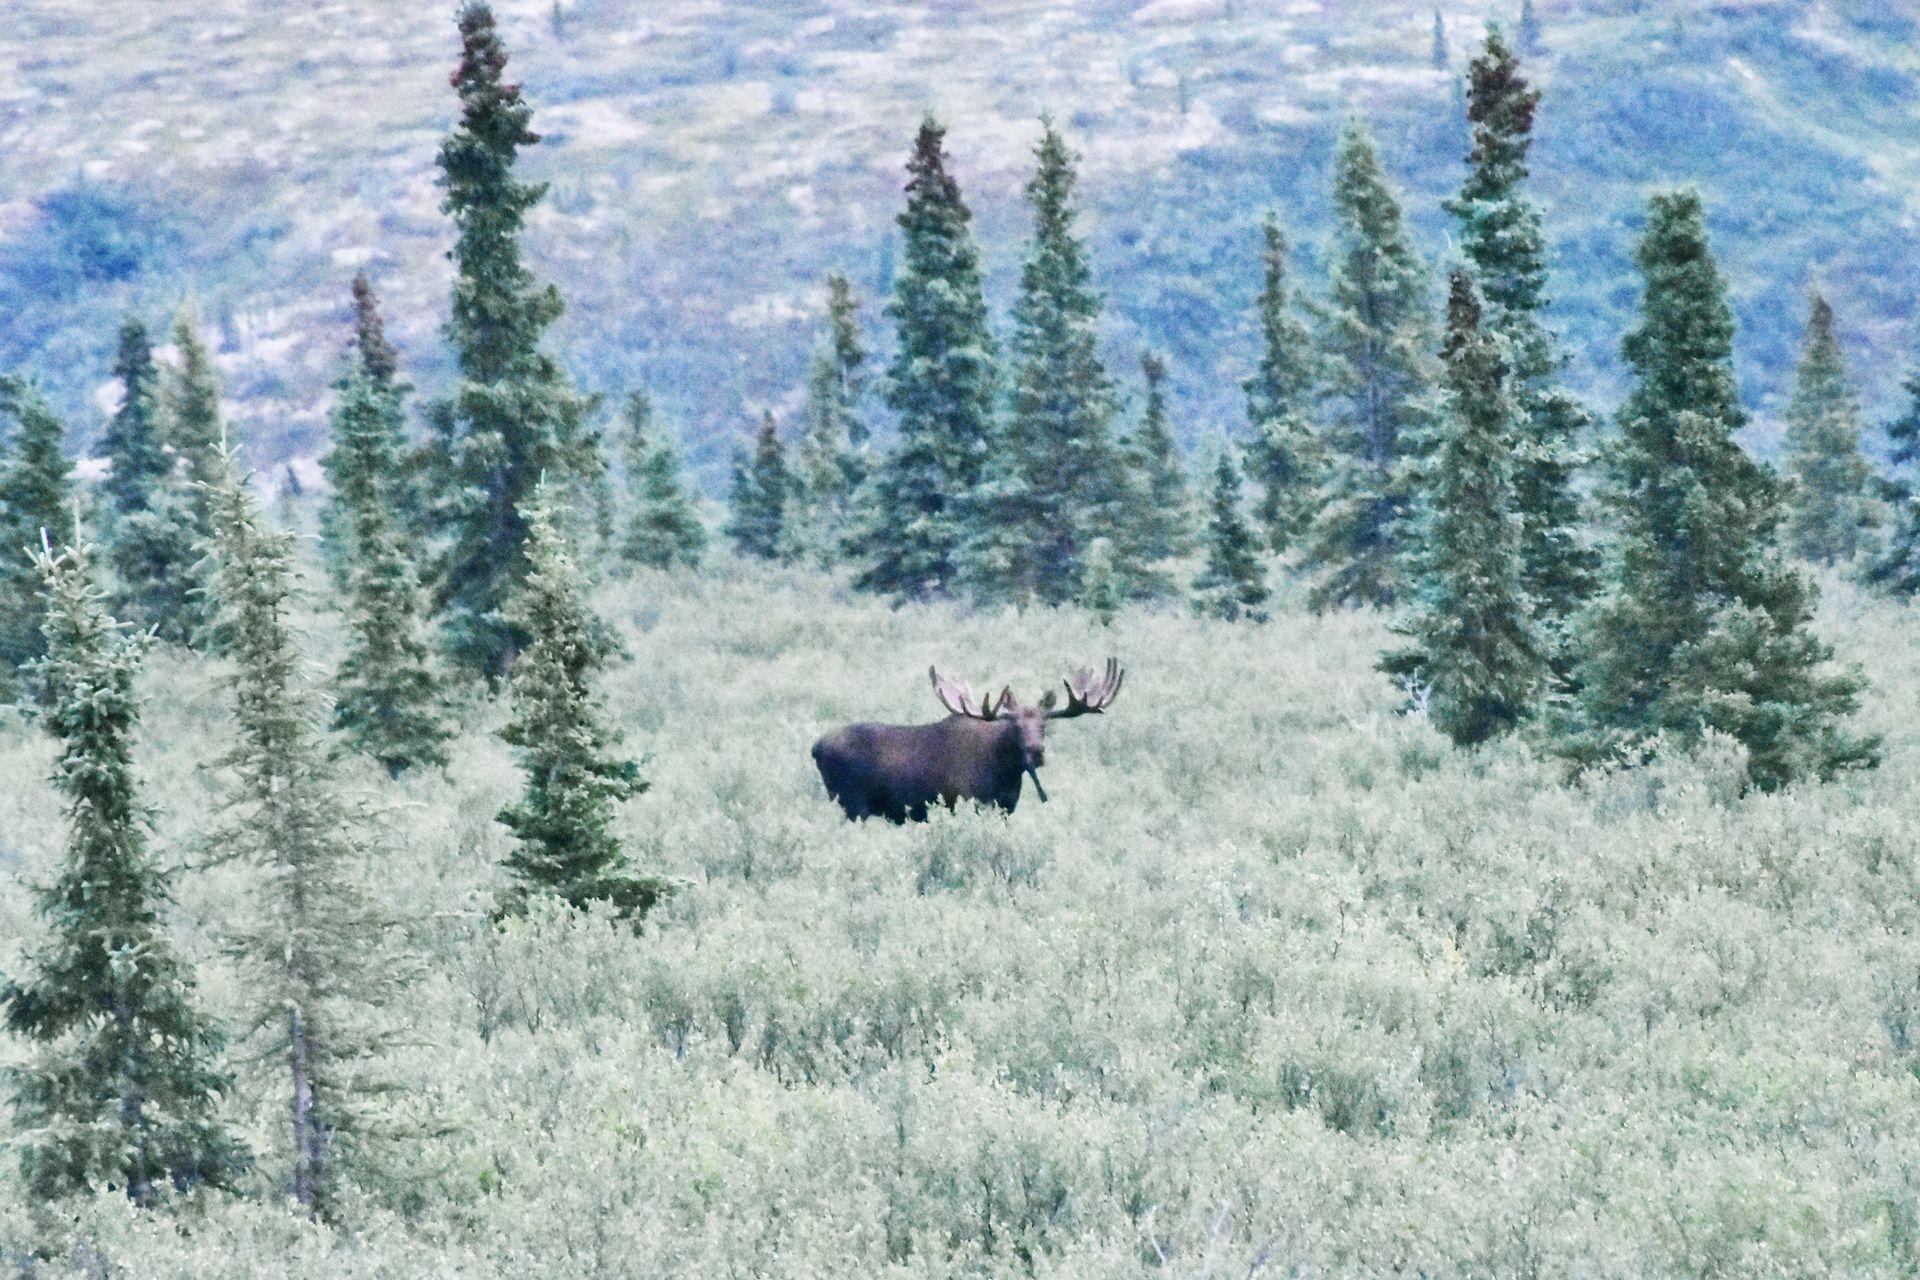 A moose surrounded by trees in Denali National Park